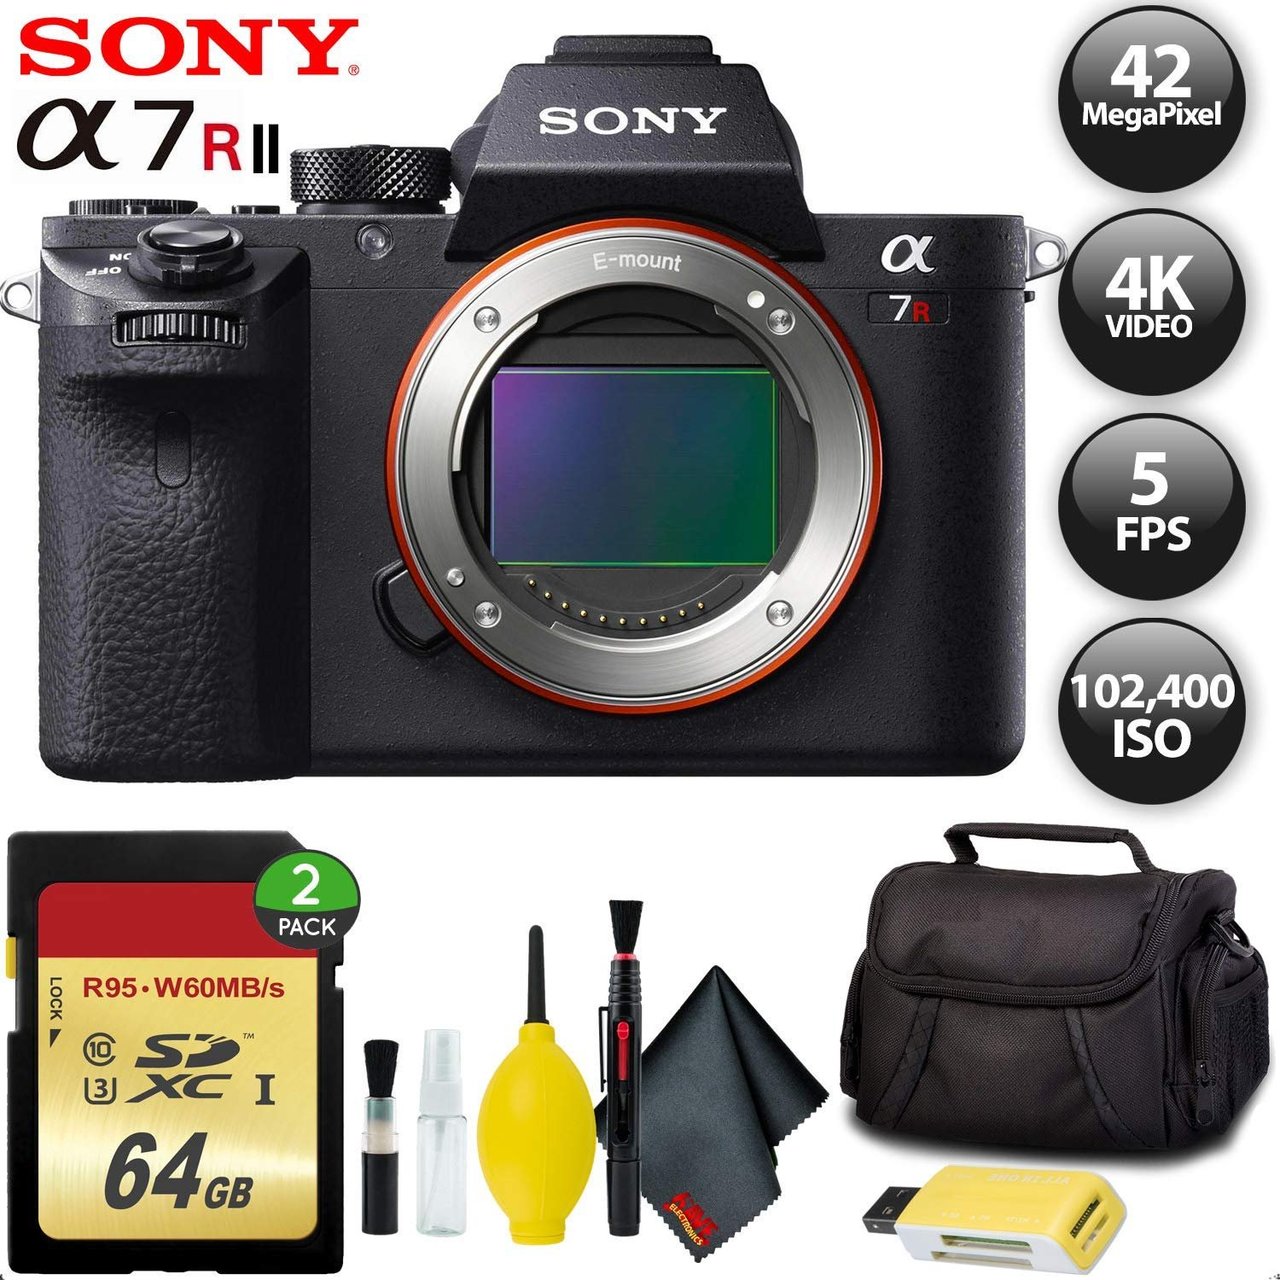 Sony Alpha a7R II Mirrorless Digital Camera + 64GB Memory Card Base Kit with Accessories